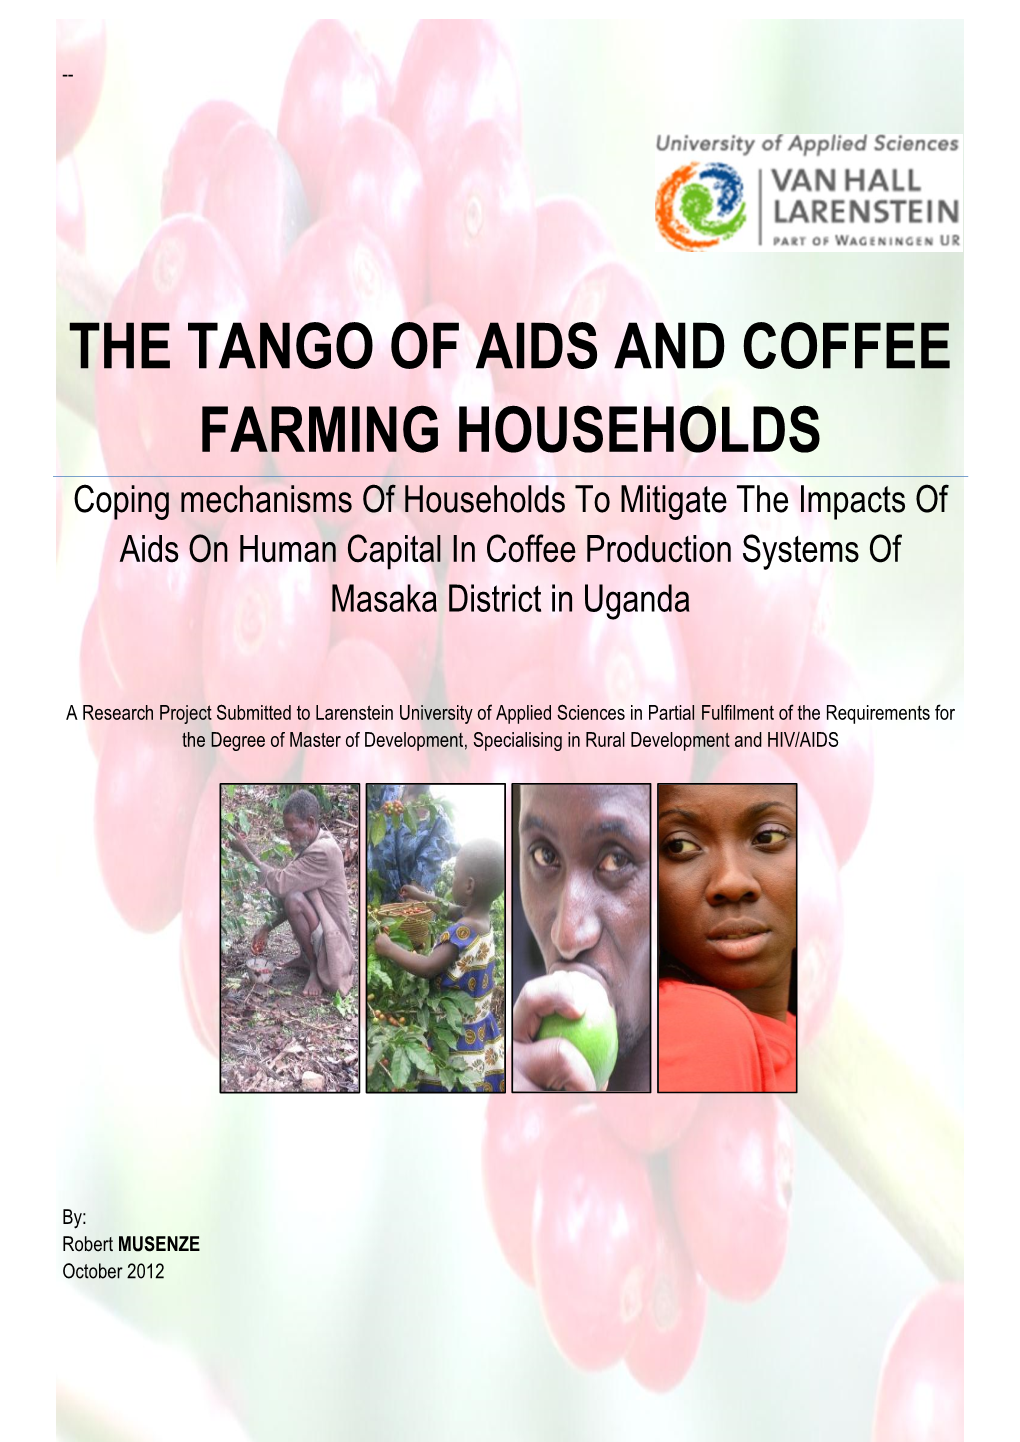 The Tango of Aids and Coffee Farming Households